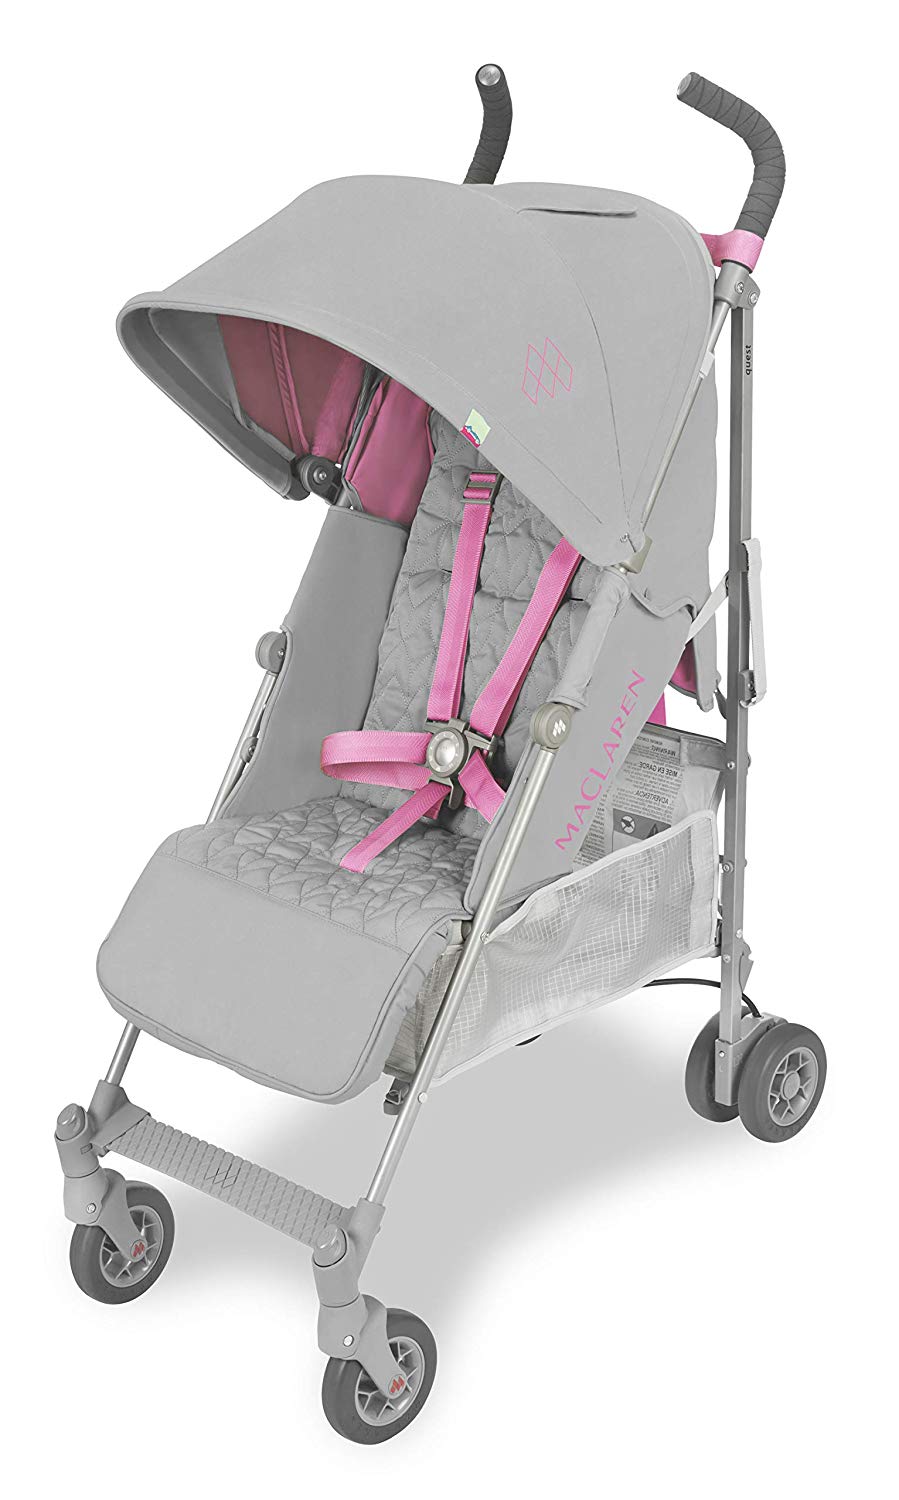 Maclaren Quest Buggy - Fully equipped, lightweight and compact. Newborn Safety System™ and compatible with Maclaren bassinets, retractable UPF50+/waterproof canopy, accessories in box